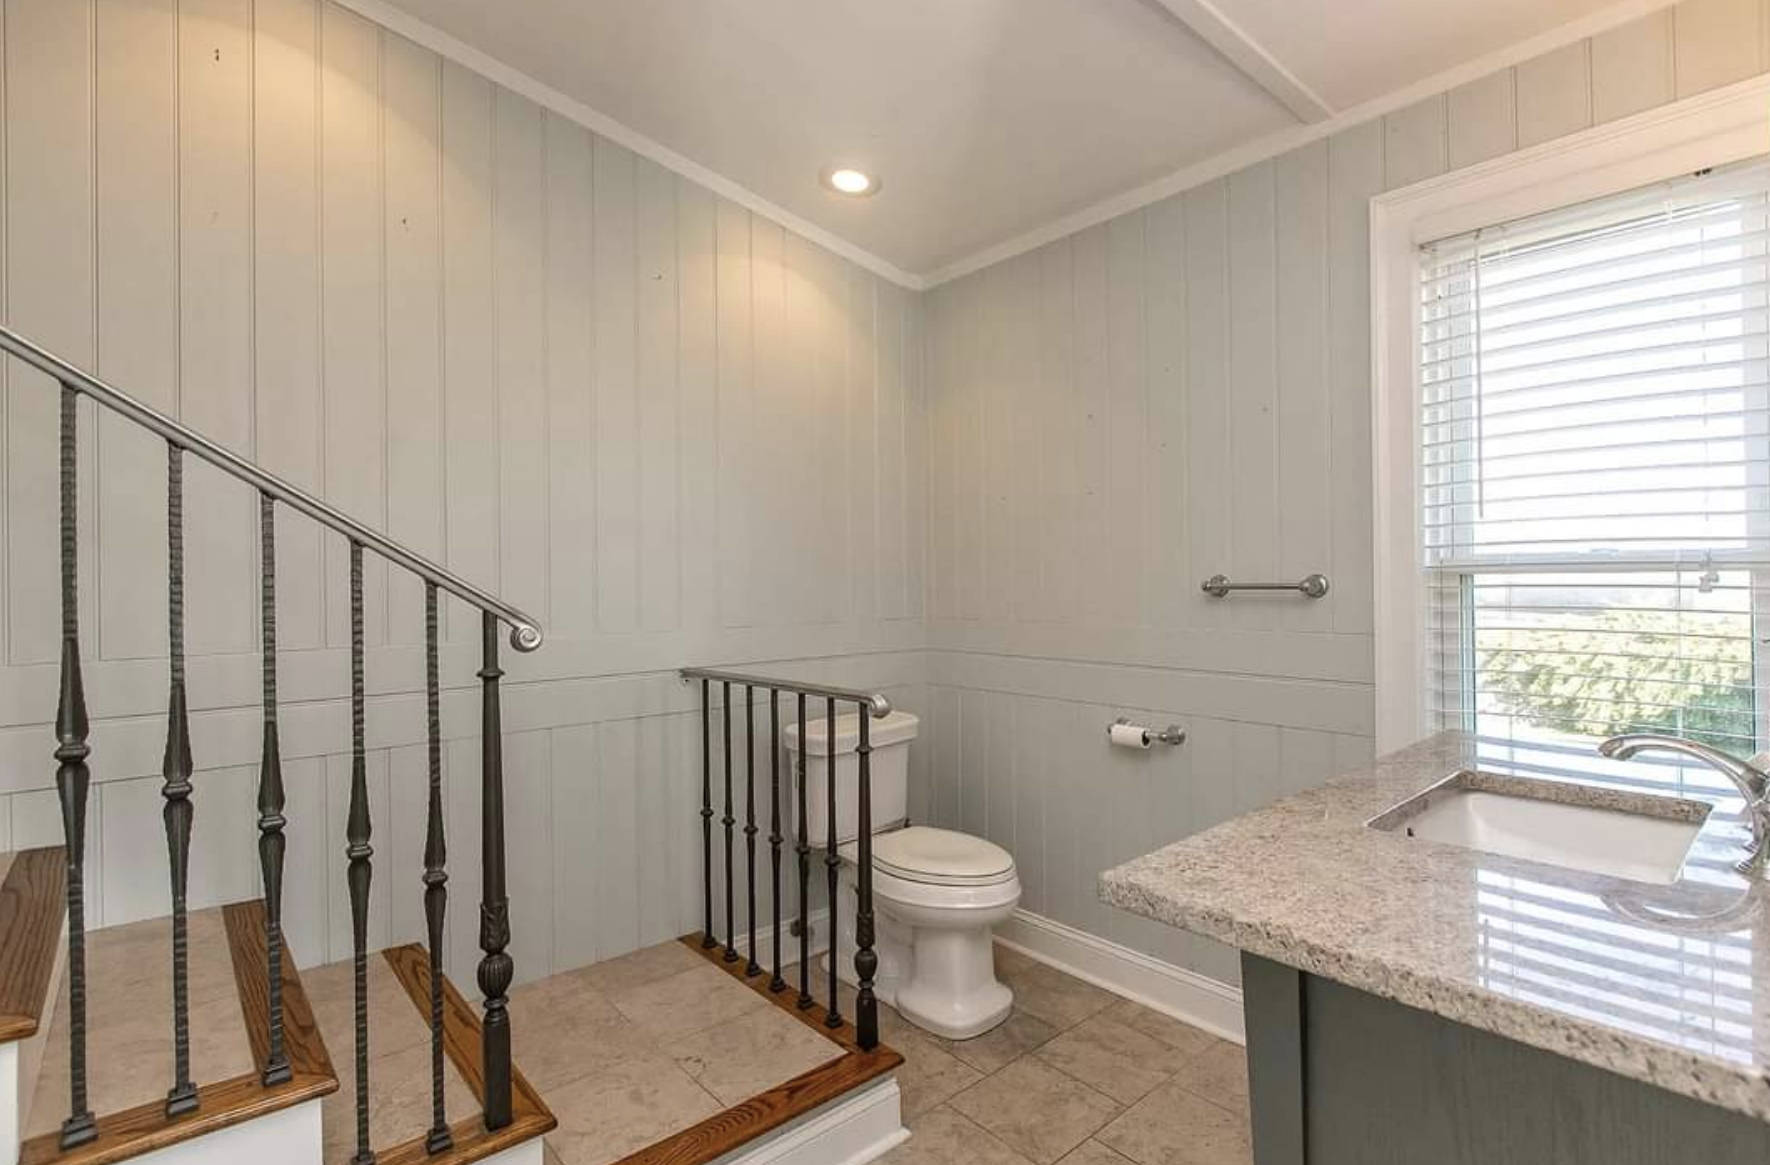 A staircase leading to a bathroom